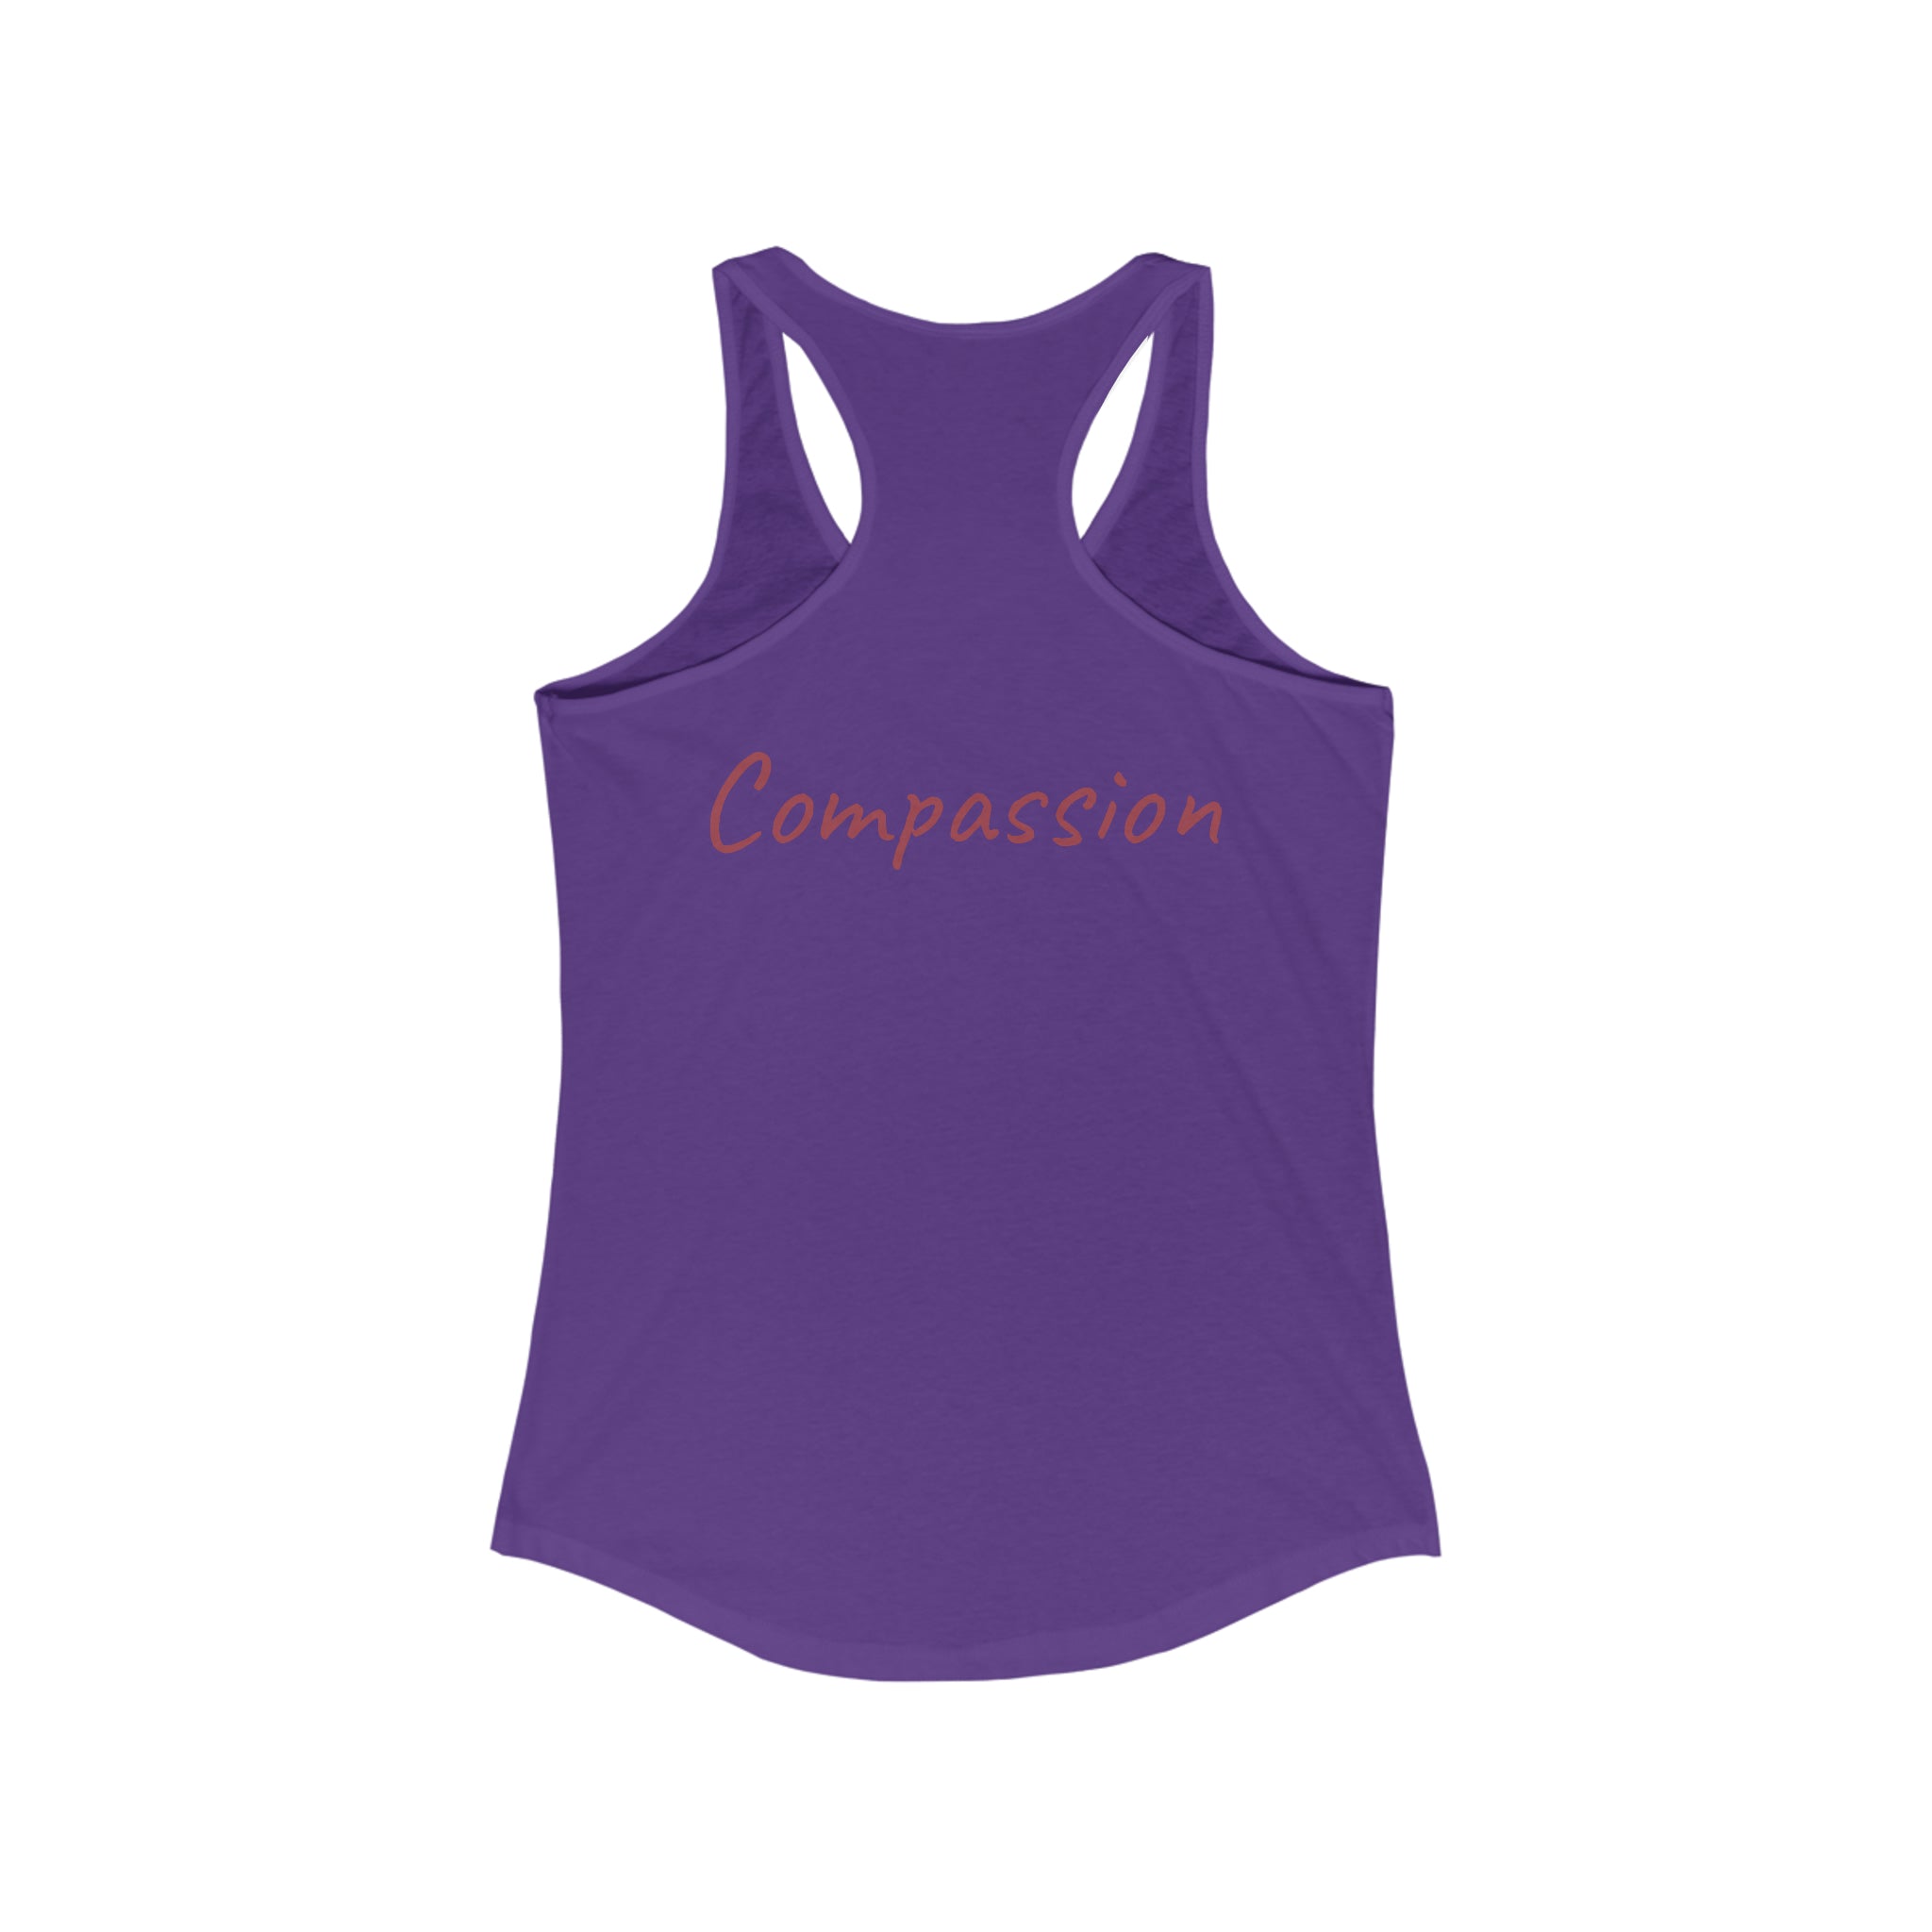 Compassion Racerback Tank: Fashion meets advocacy Solid Purple Rush Activewear Athletic Tank Gym Clothes Performance Tank Racerback Sleeveless Top Sporty Apparel Tank Top Women's Tank Workout Gear Yoga Tank Tank Top 12371005270777228625_2048 Printify